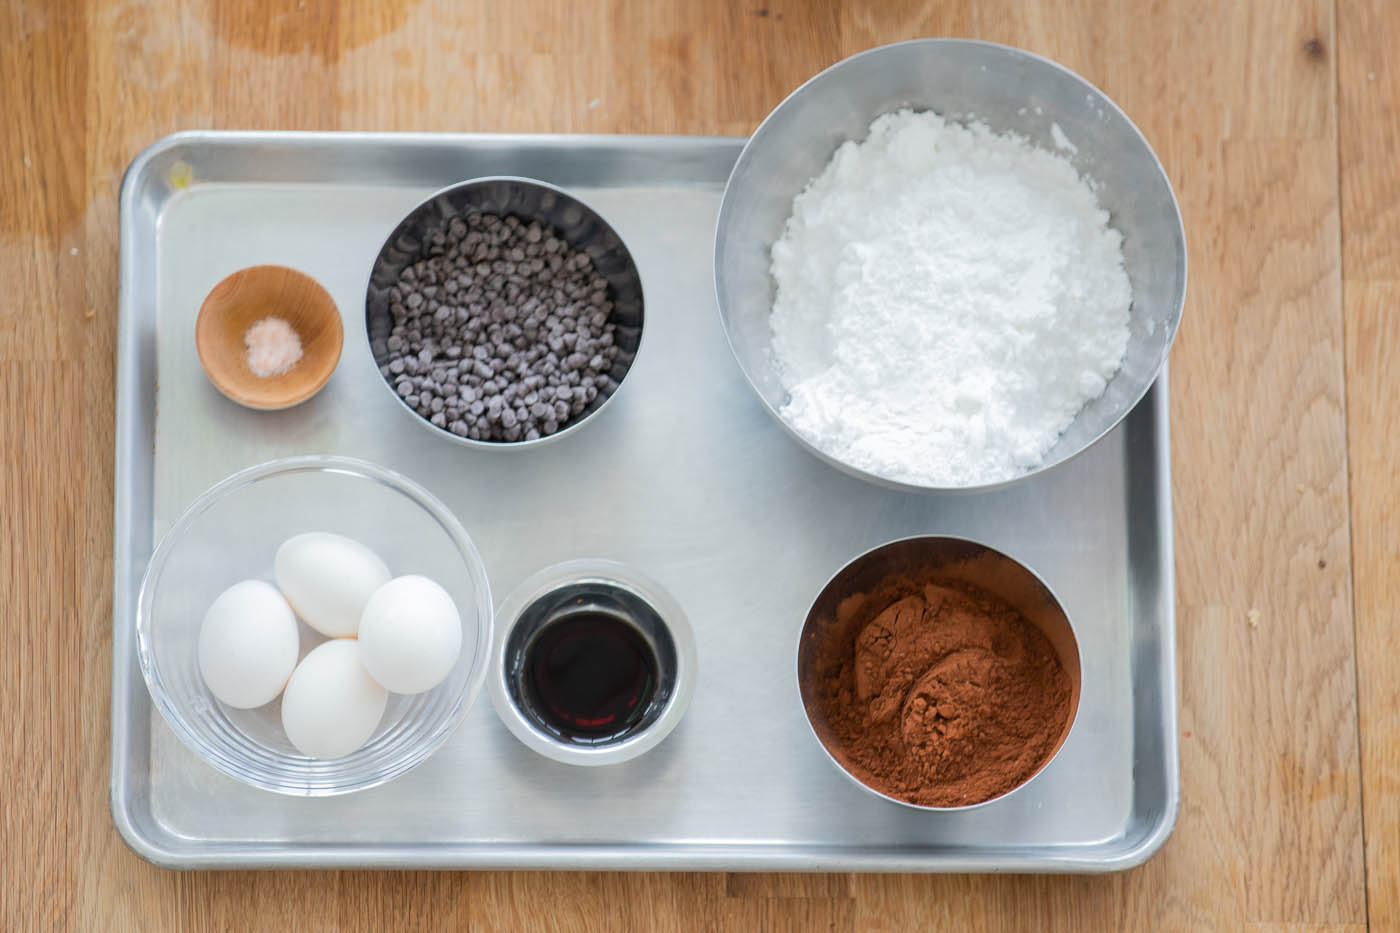 The Real Food Academy - How to Mise en Place